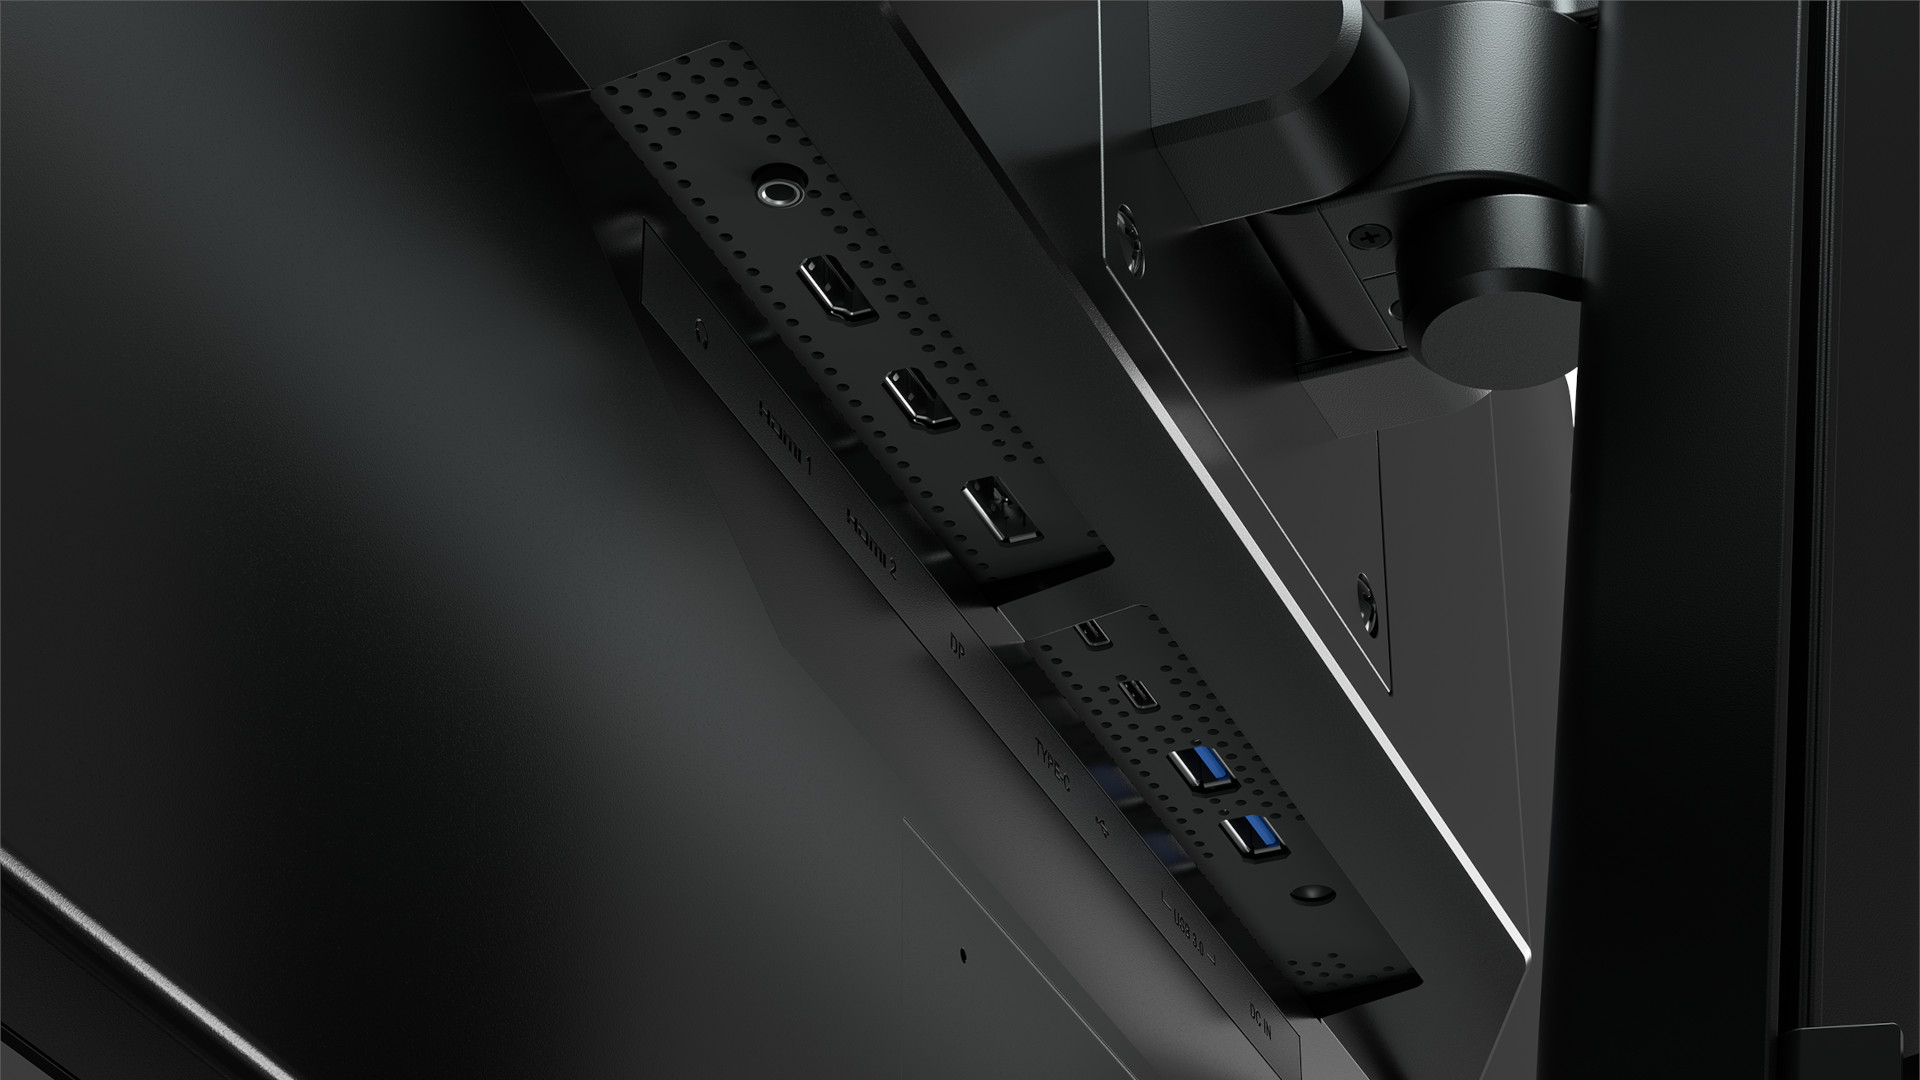 The underside of the Corsair Xeneon 32UHD144, showcasing its connectivity options and ports